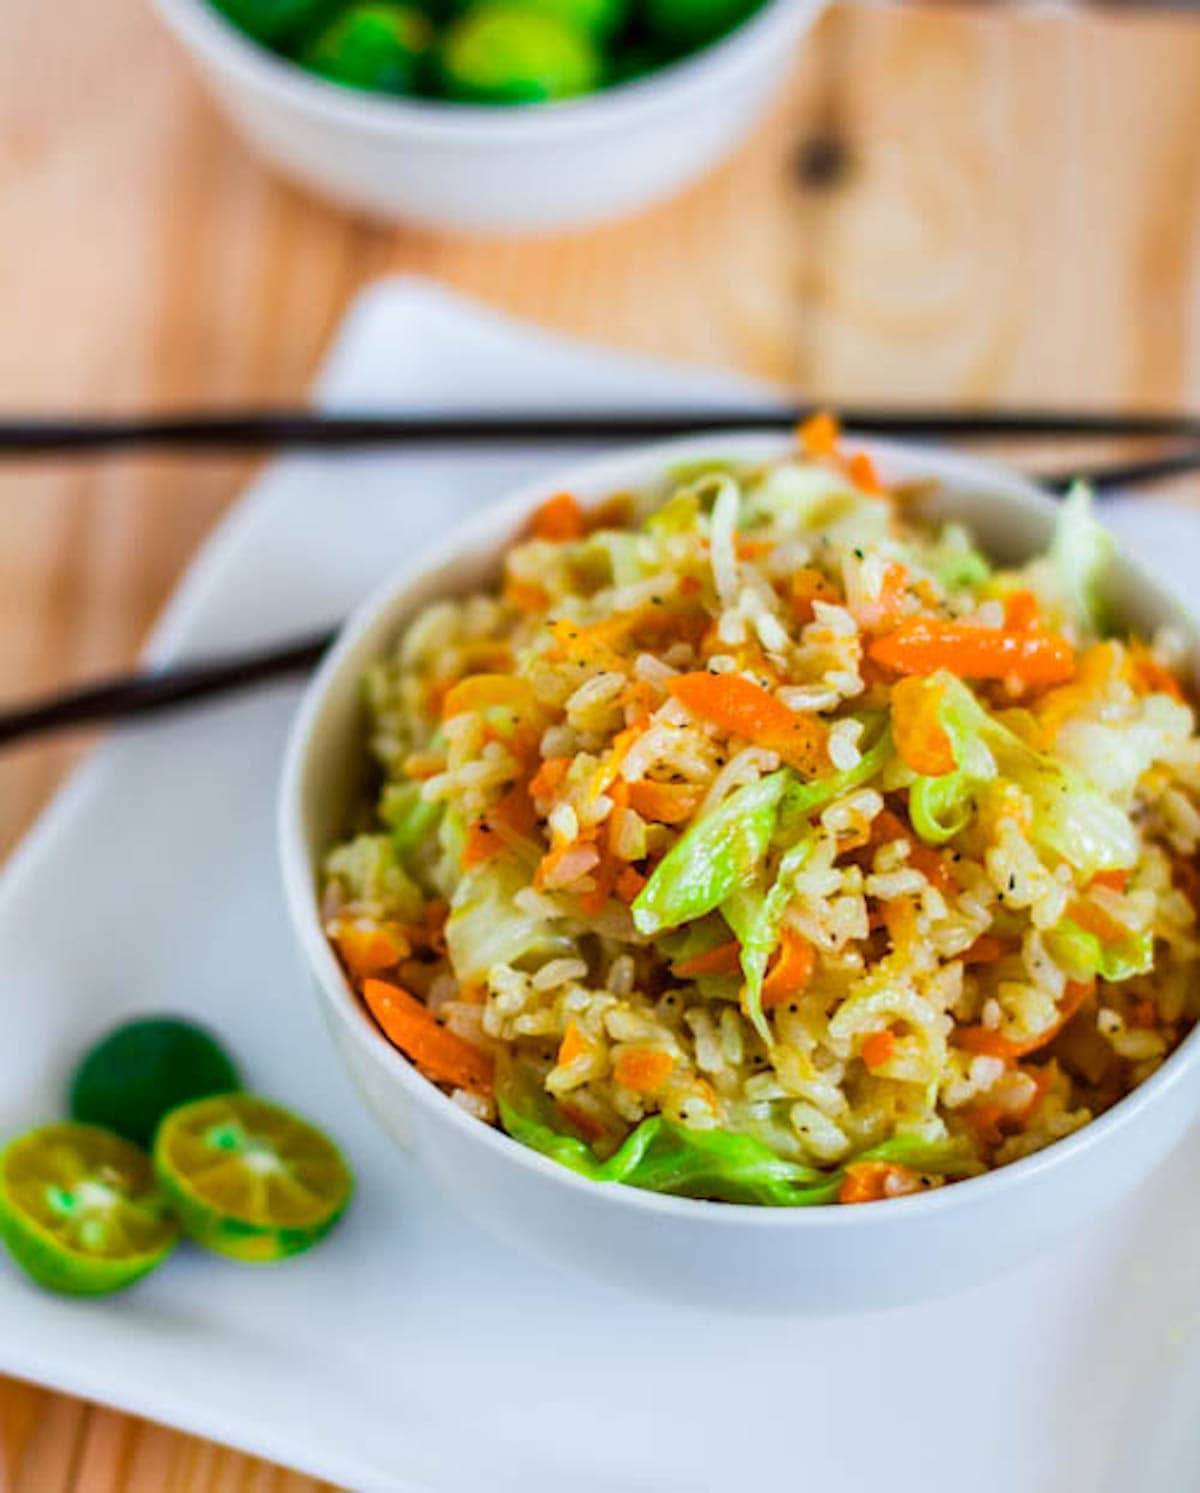 Skinny Garlic Fried Rice in a bowl with limes and chopsticks.